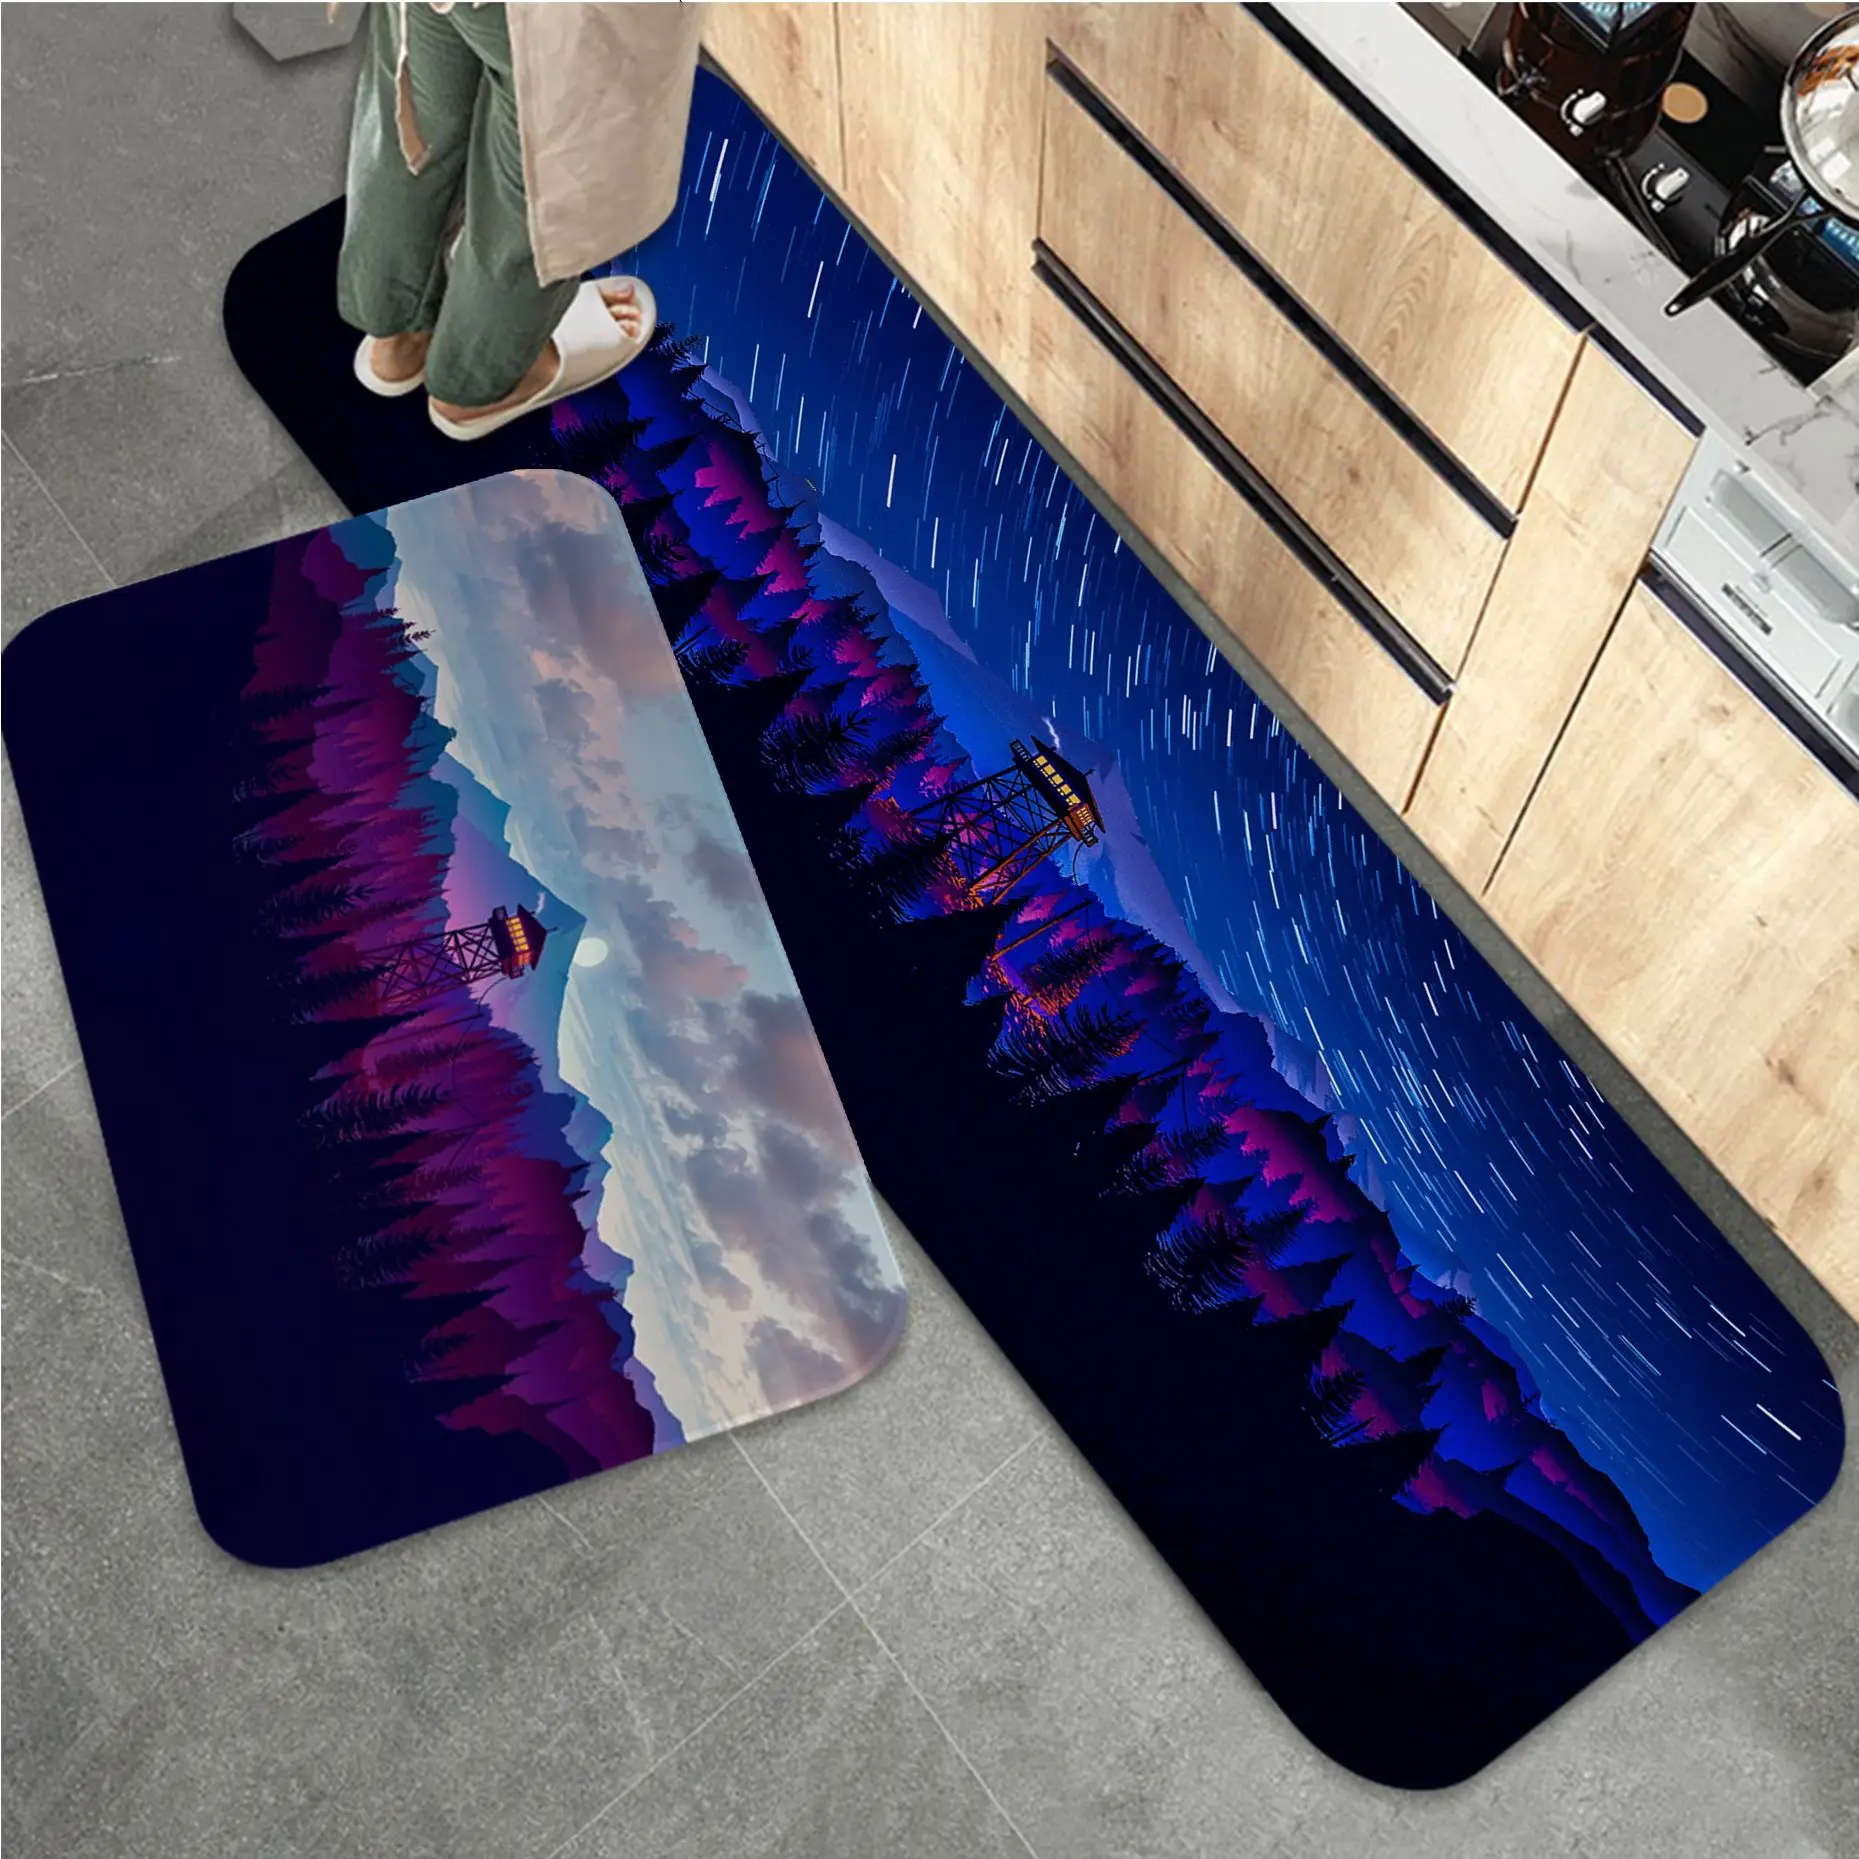 

Deep Forest Firewatch Anime Entrance Door Mat INS Style Soft Bedroom Floor House Laundry Room Mat Anti-skid Welcome Doormat